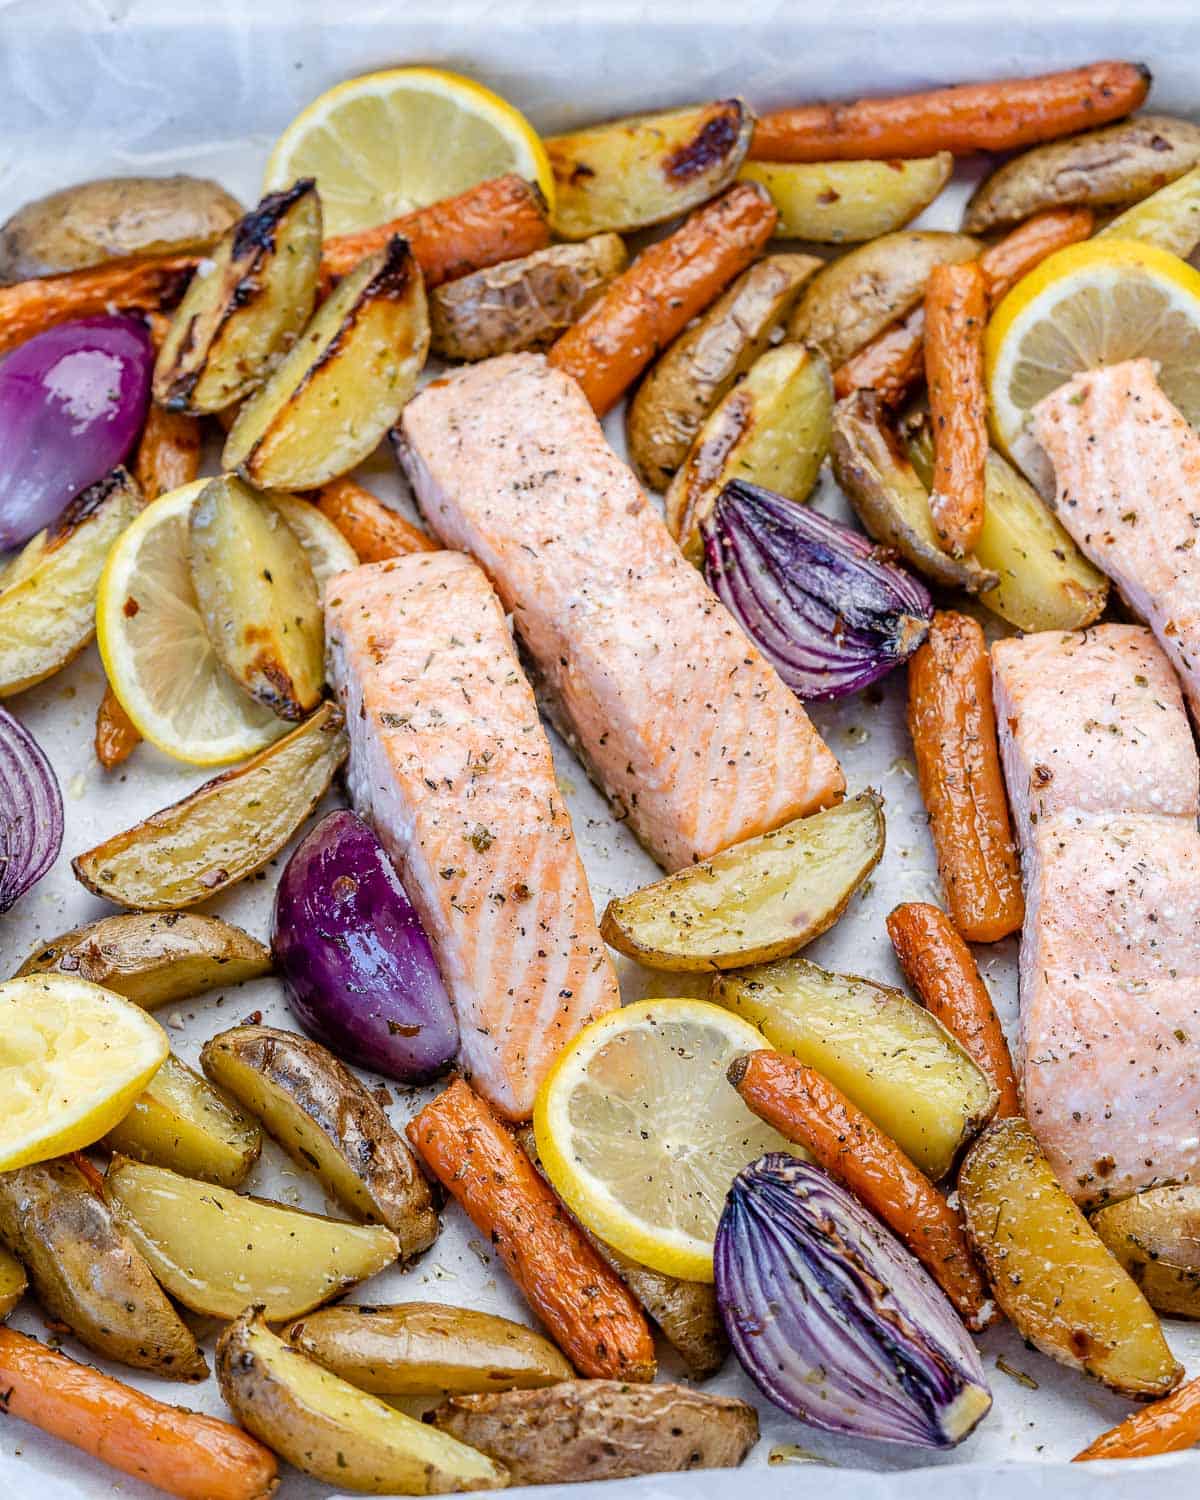 top view of oven-roasted salmon with potatoes and veggies on baking tray